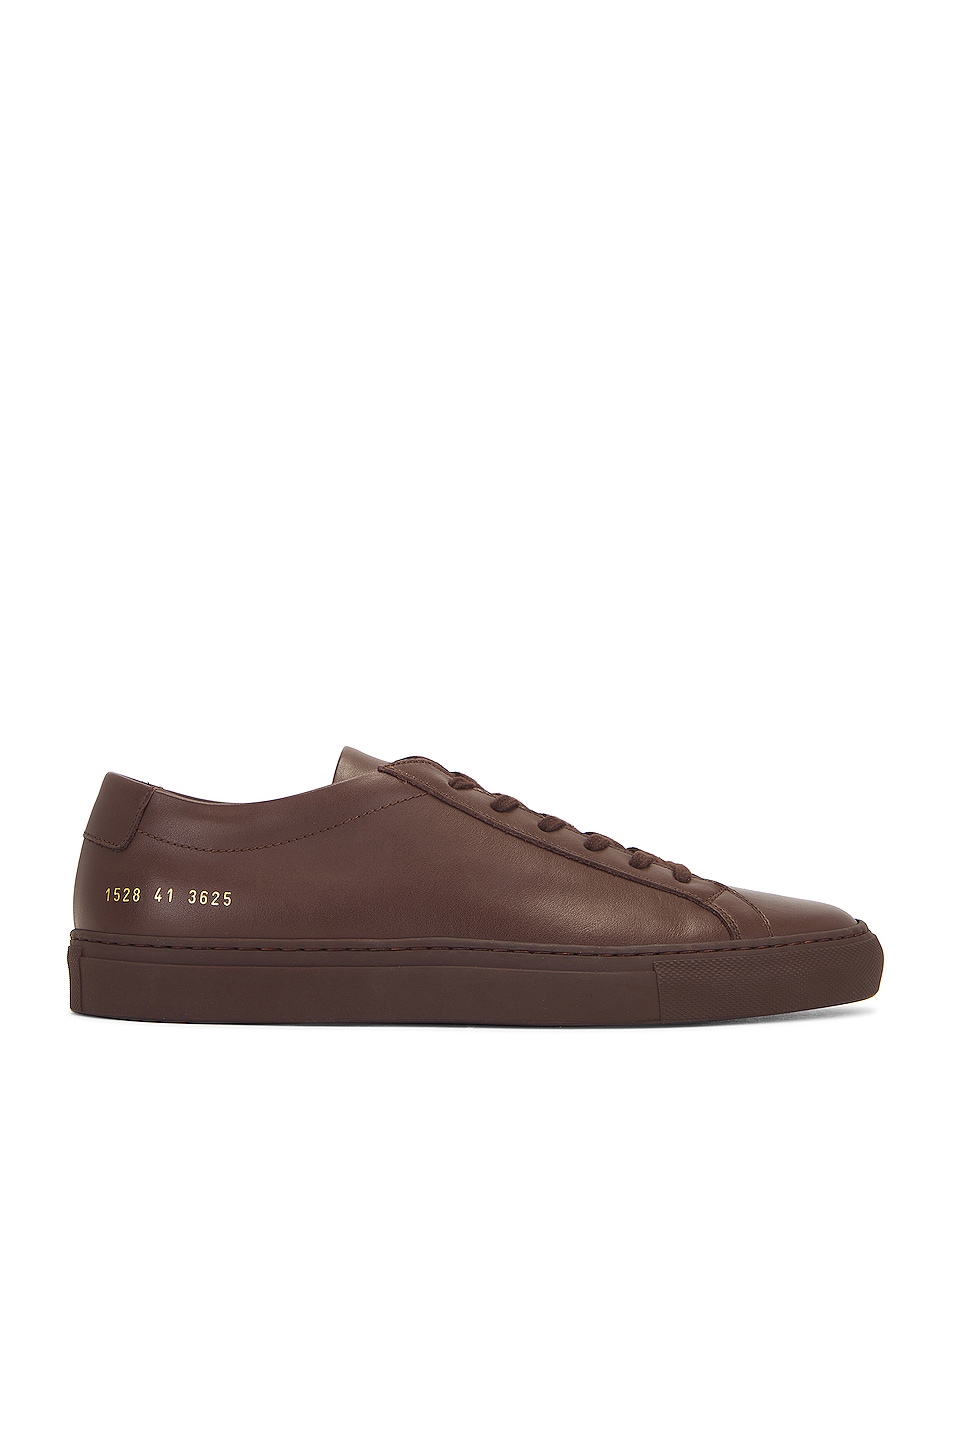 Image 1 of Common Projects Original Achilles Low Article 1528 in Moka